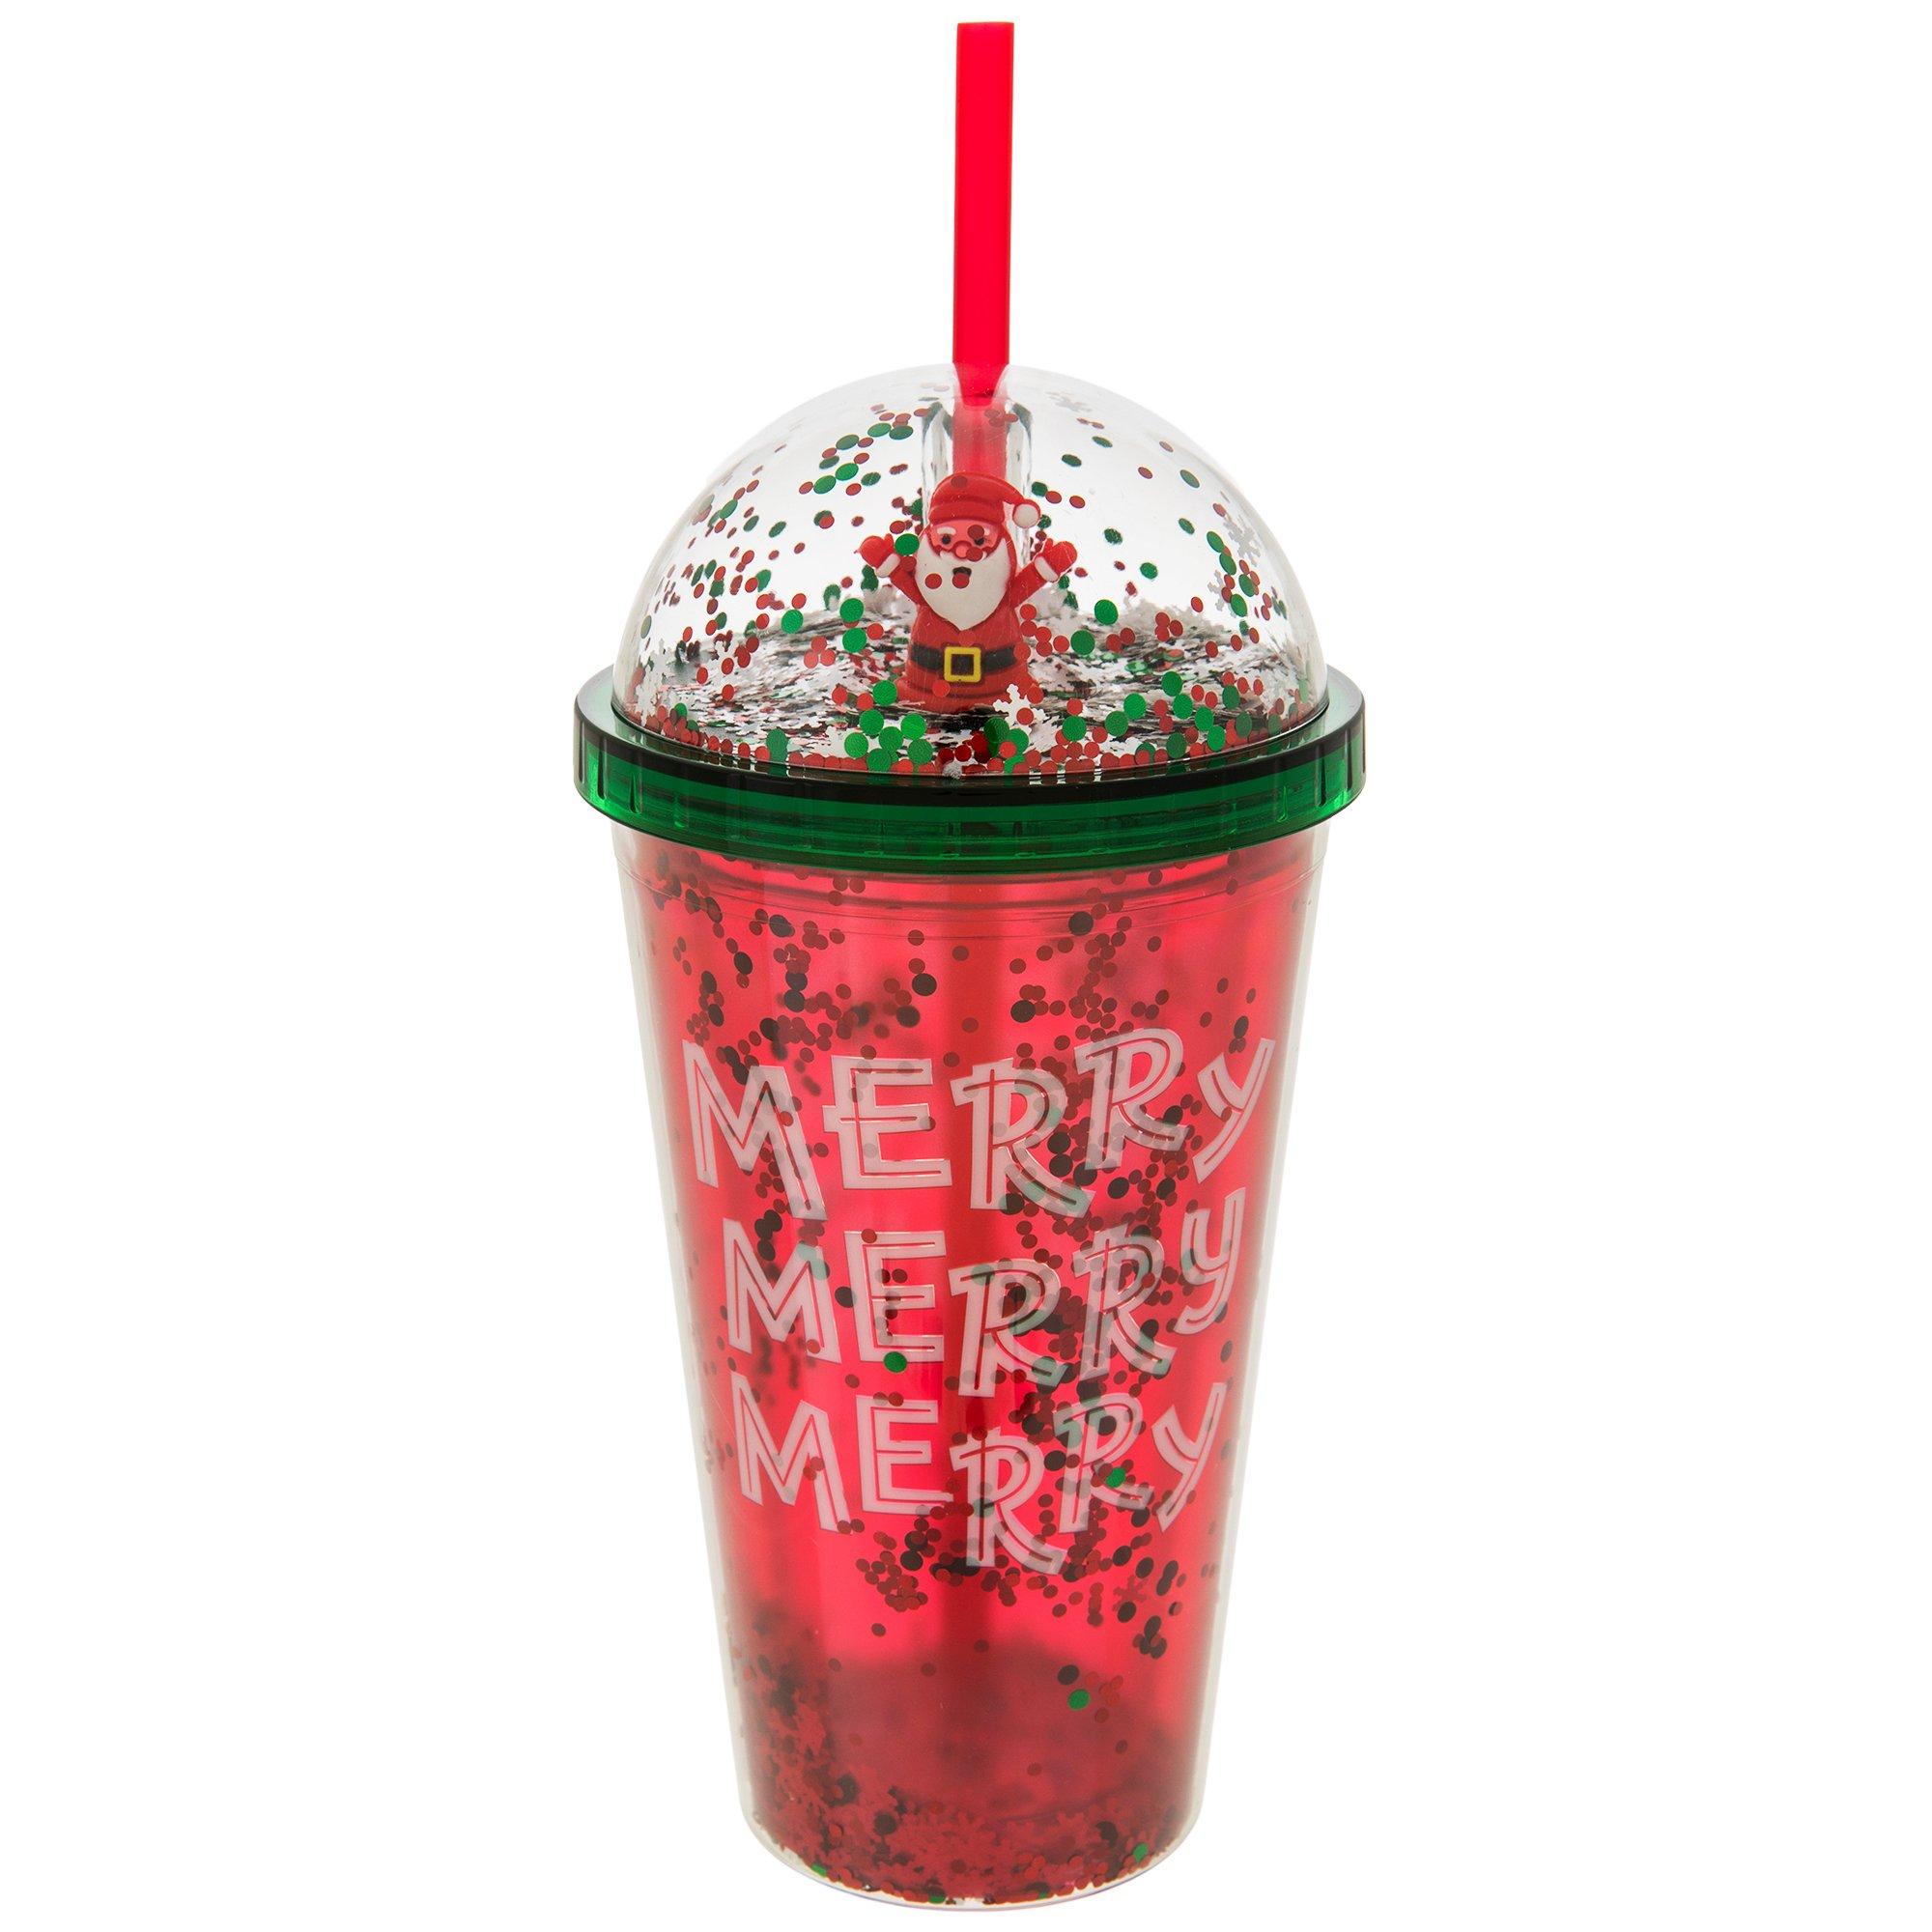 Glitter Smiley Face Cup With Straw, Hobby Lobby